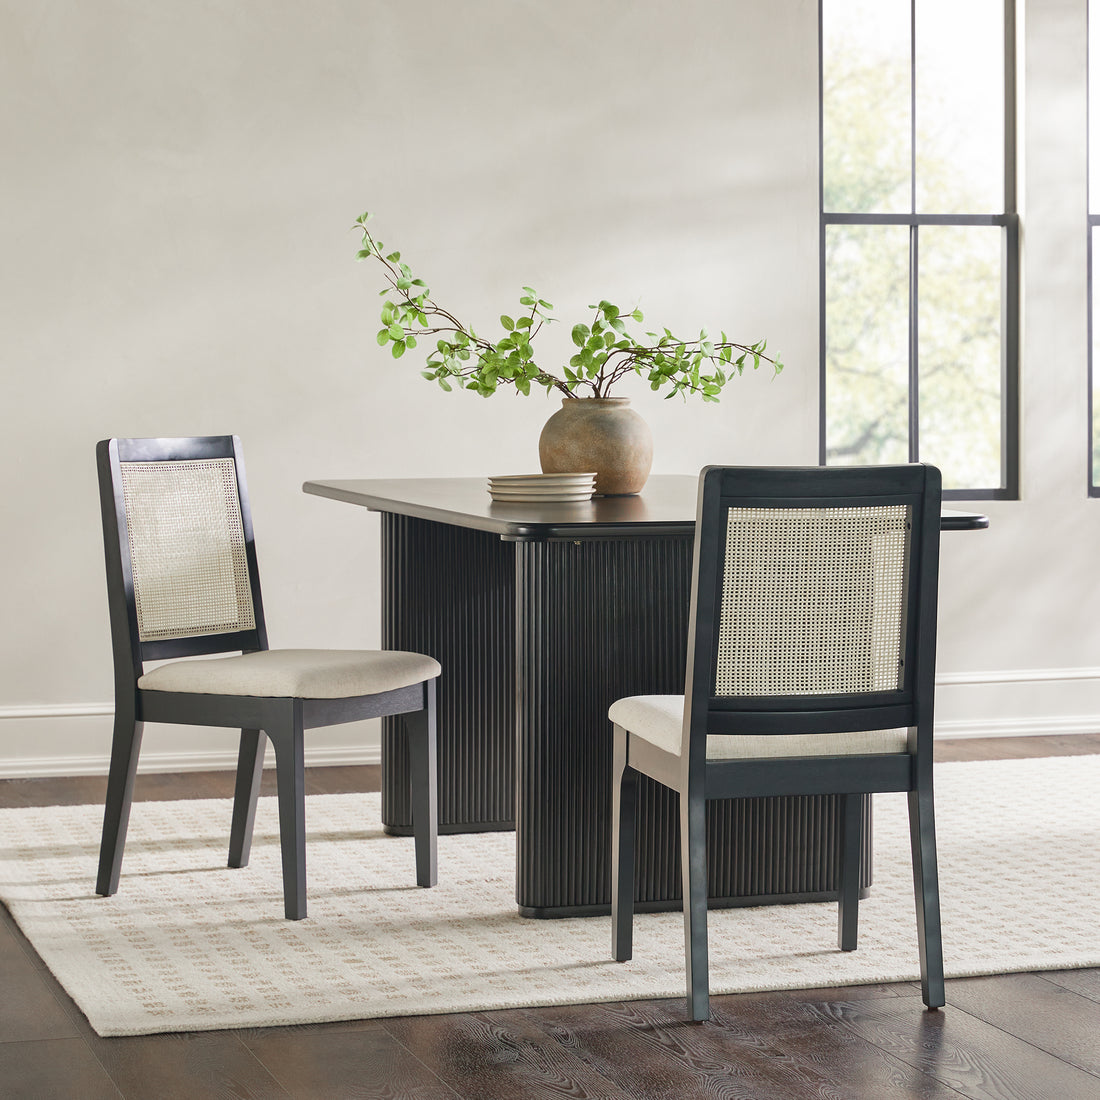 Modern Solid Wood Dining Chair With Rattan Inset